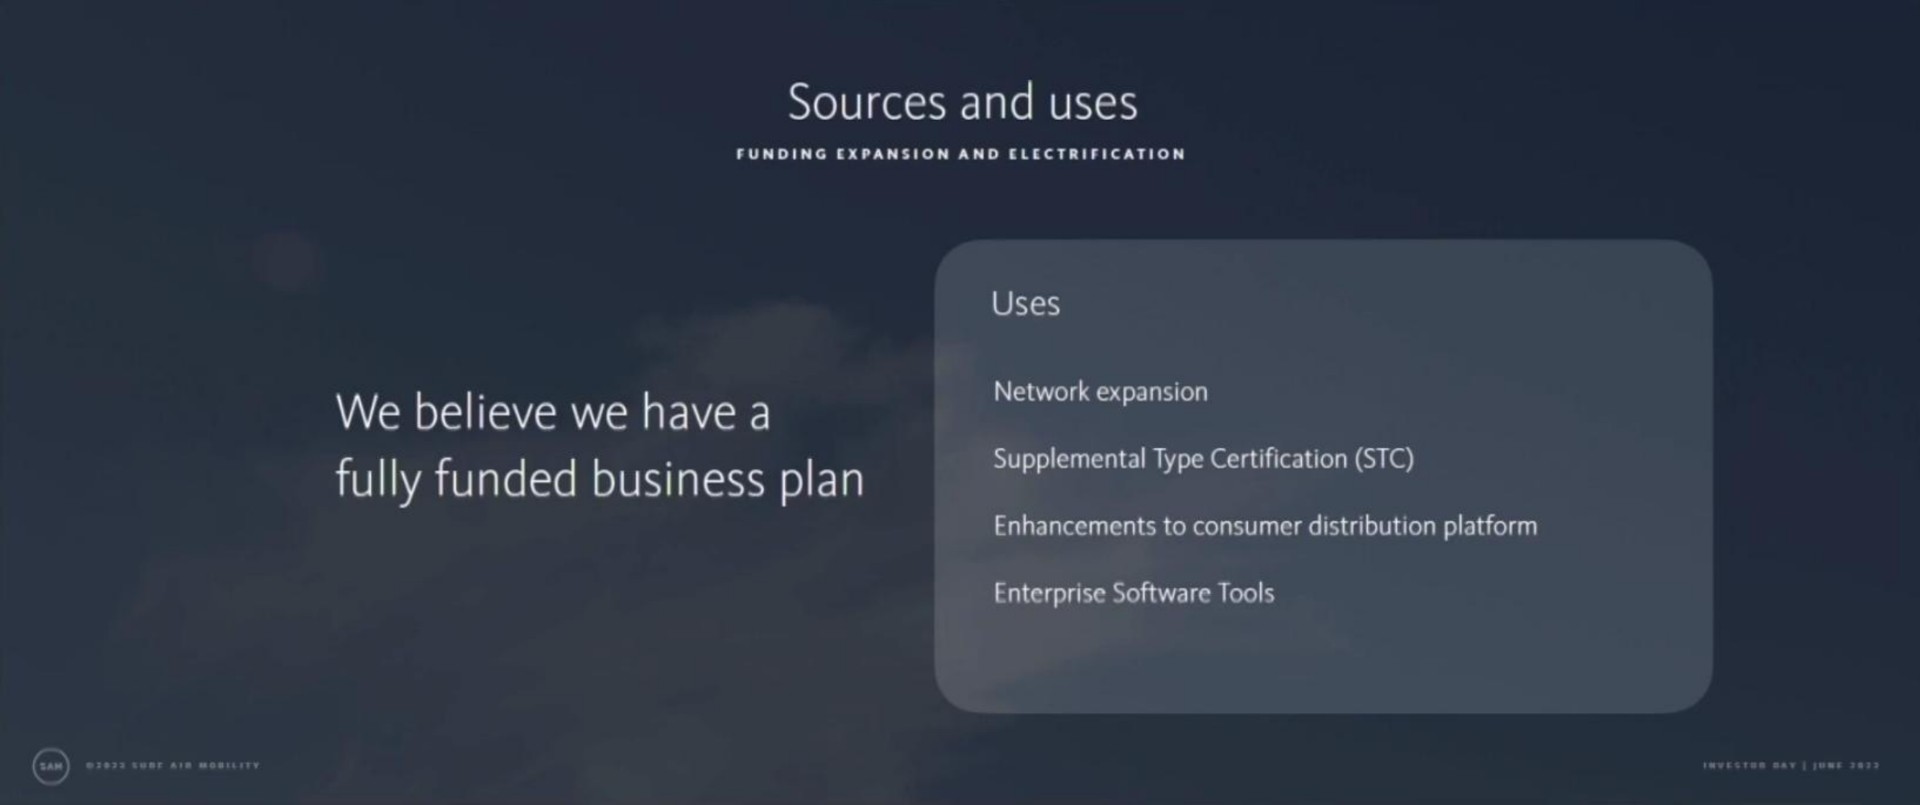 sources and uses funding expansion and electrification we believe we have a a a ats network expansion supplemental type certification enhancements to consumer distribution platform enterprise tools | Surf Air